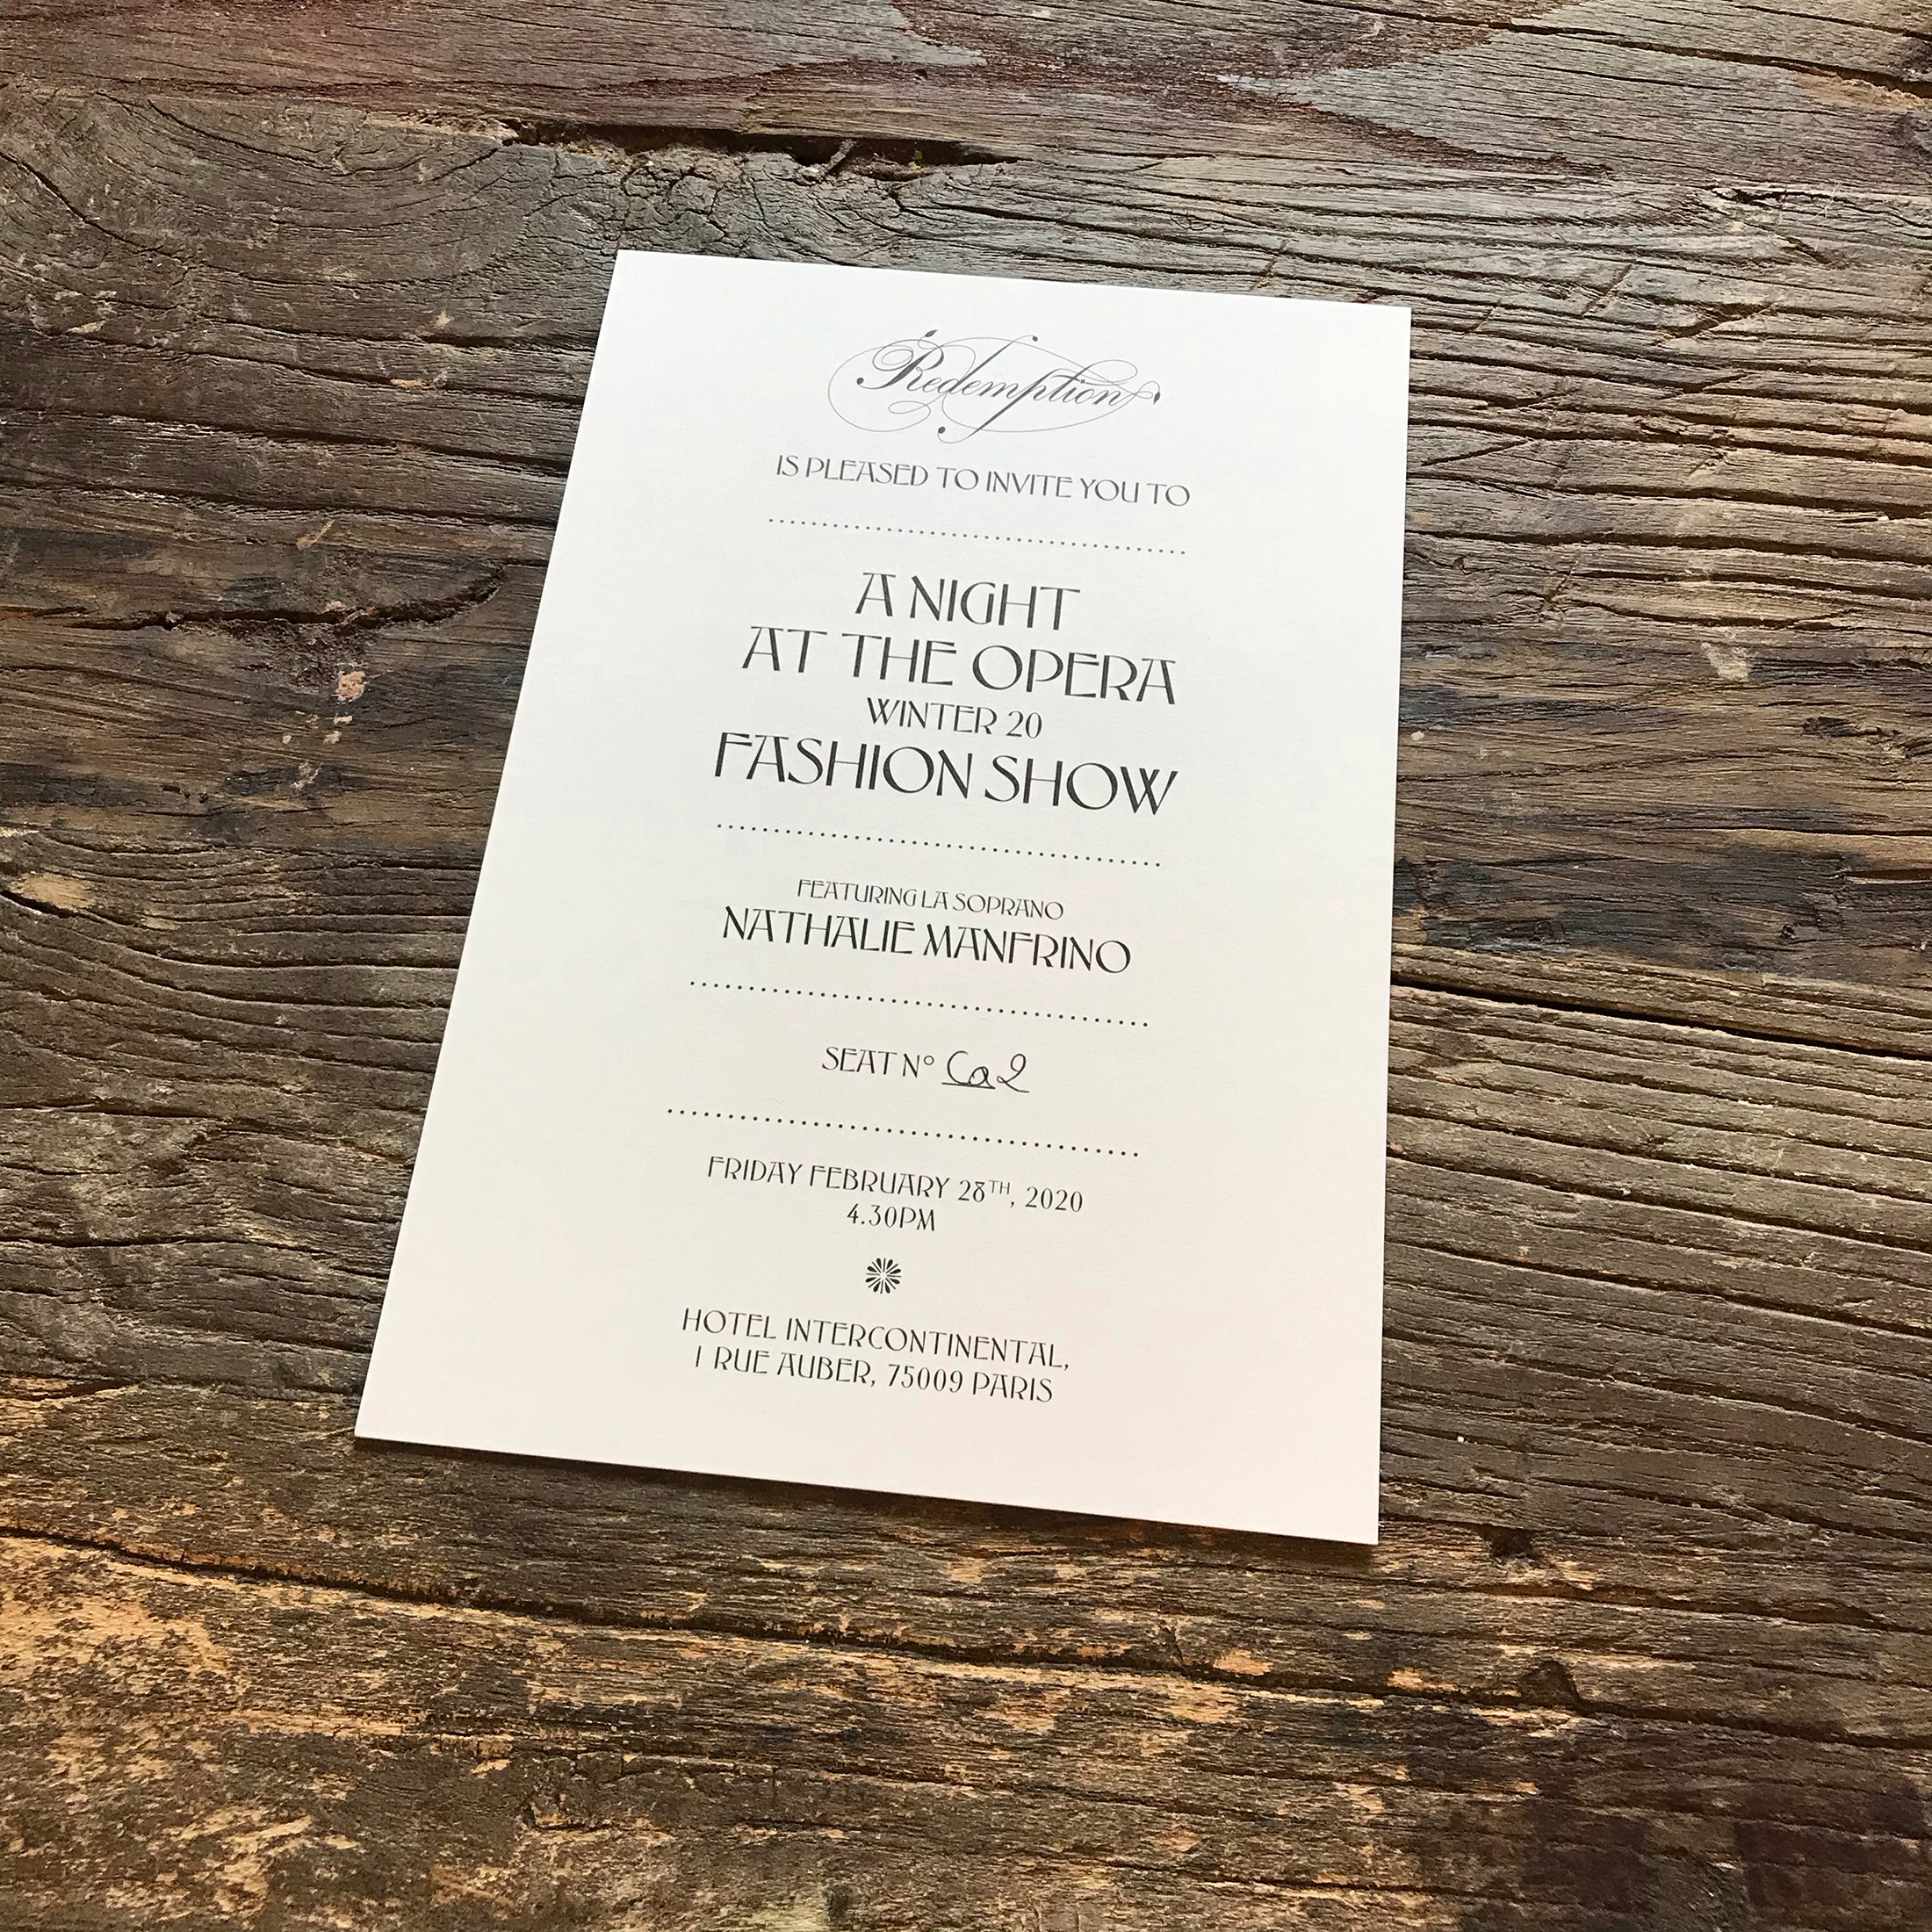 The Best Women's Fall 2020 Fashion Show Invitations  Fashion show  invitation, Fashion invitation, Invitations